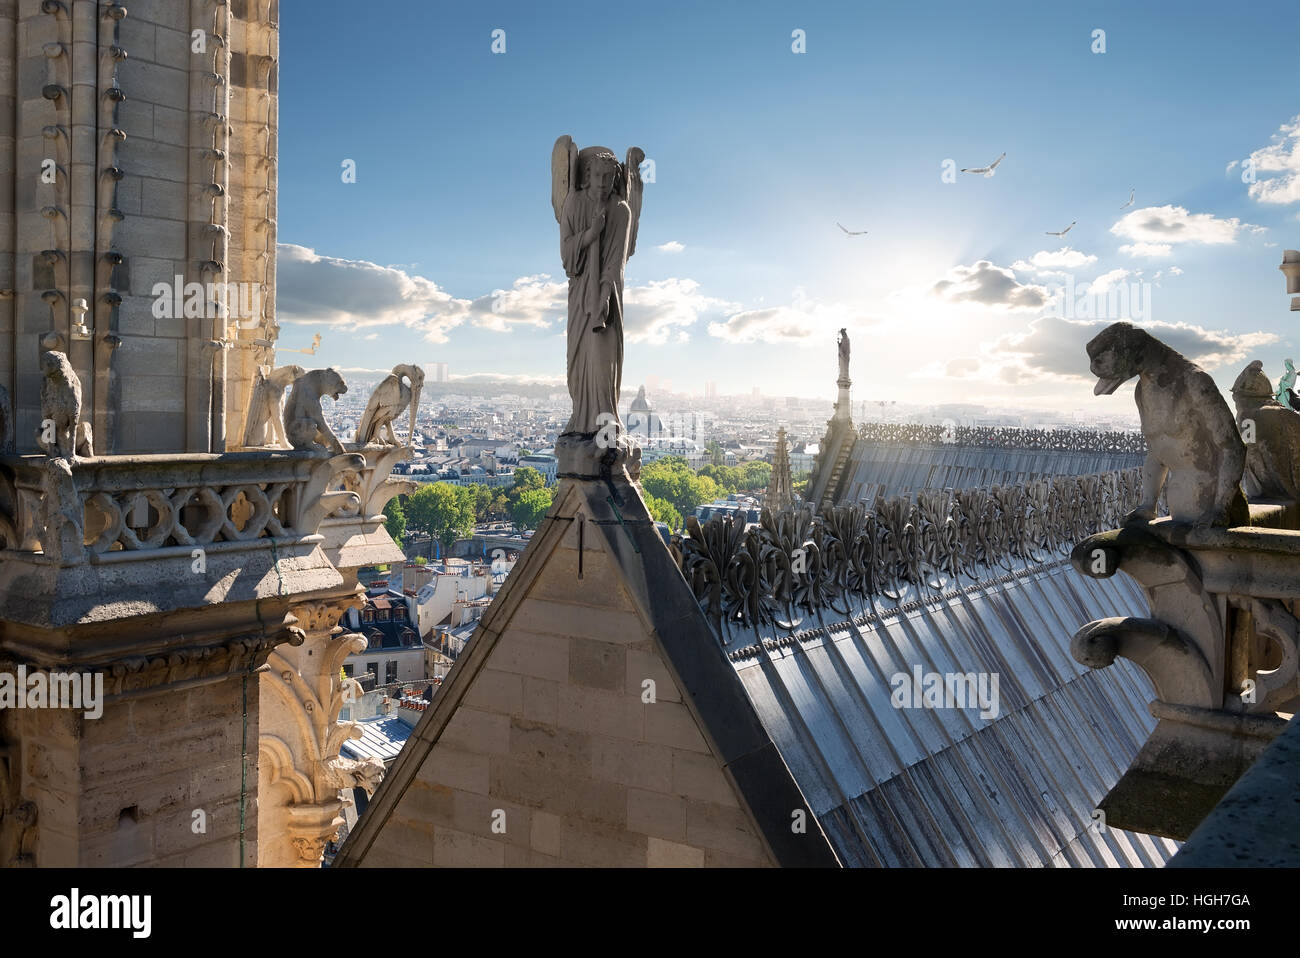 Statues of Angel and Chimeras on the roof of Notre Dame de Paris, France Stock Photo